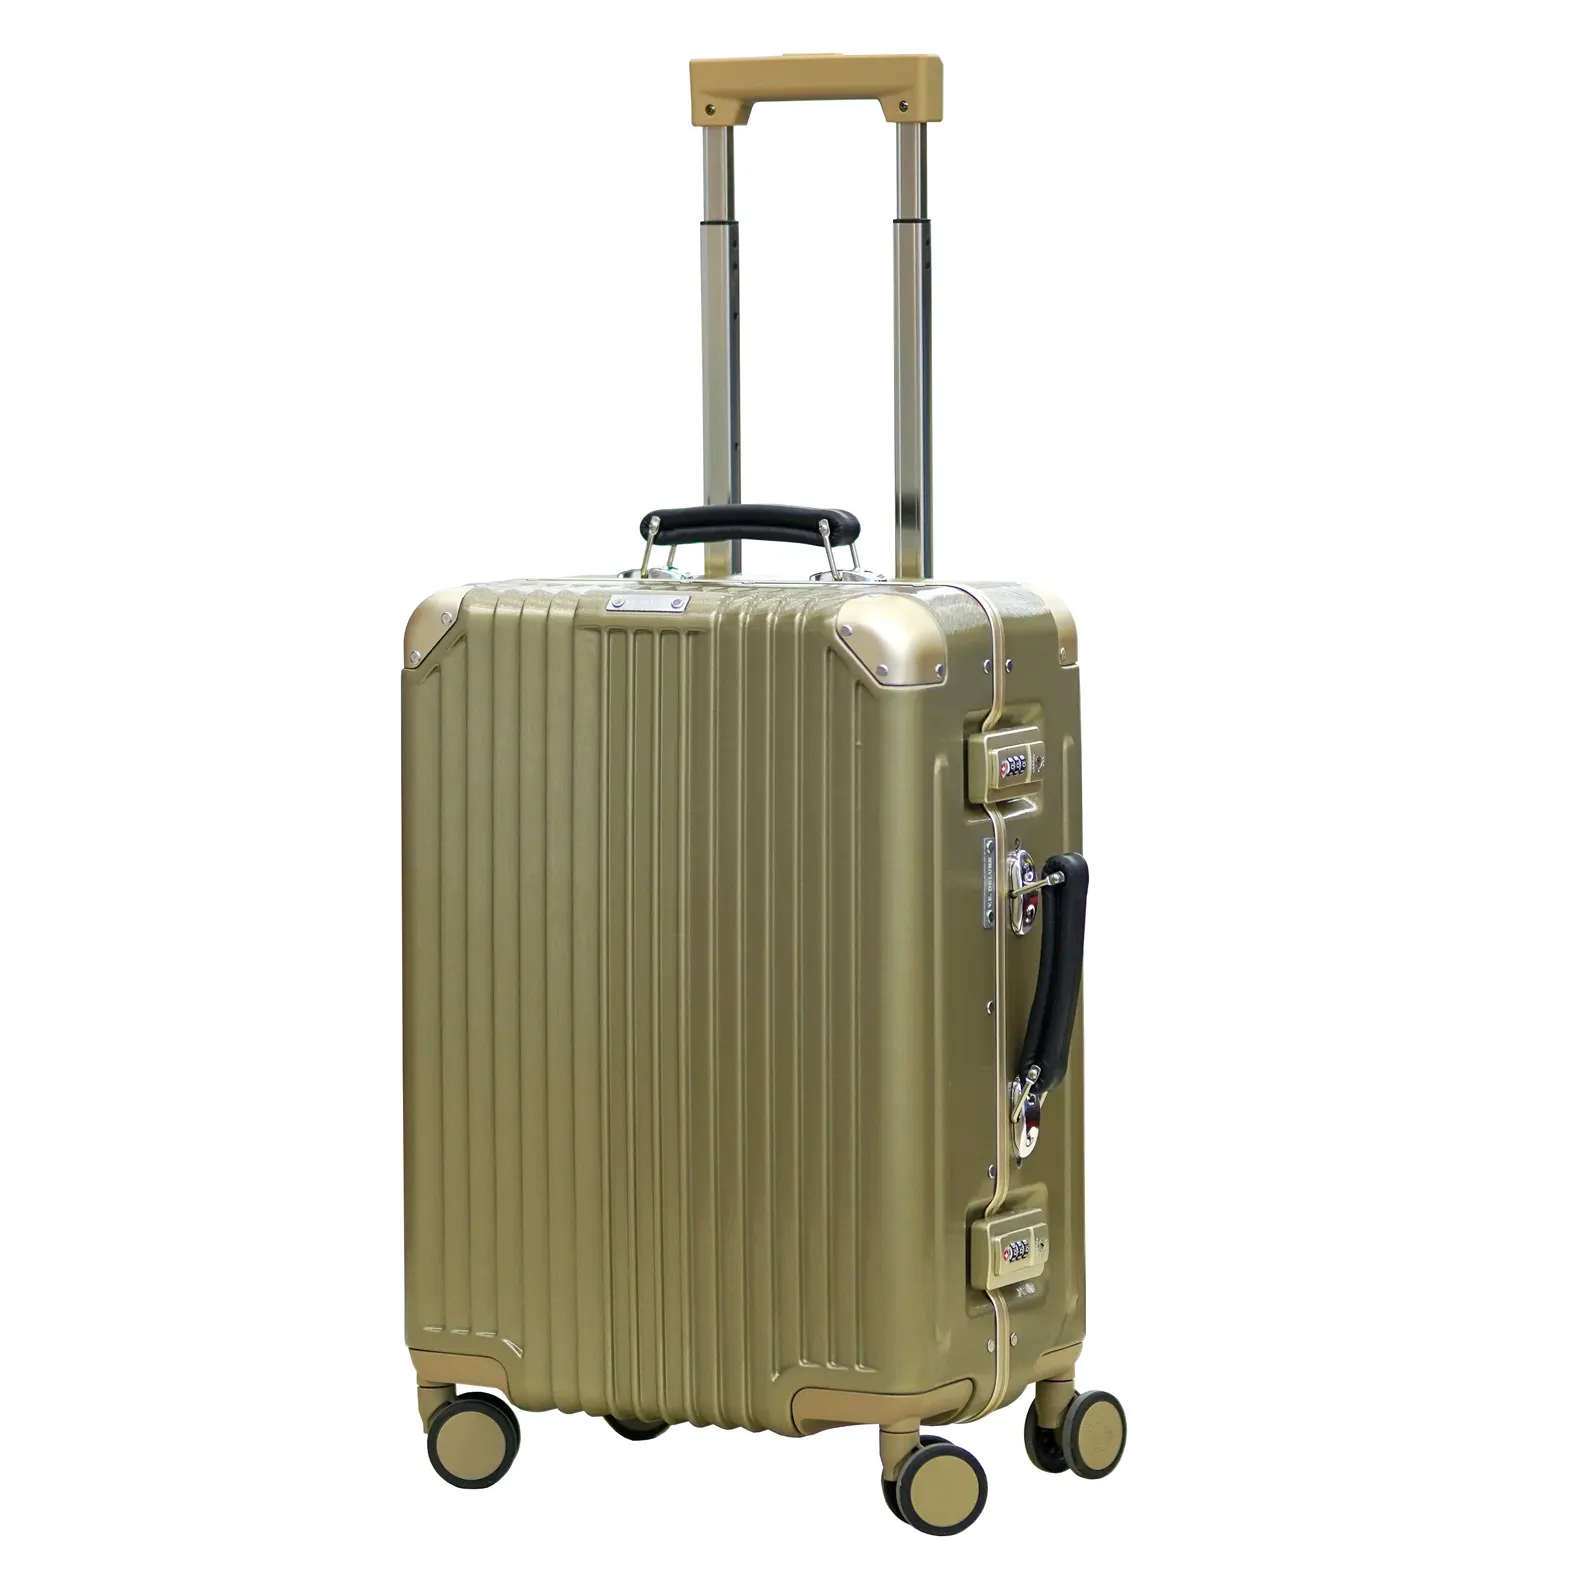 2022 Factory Hot Sale New Fashion Style ABS+PC Rolling Luggage Sets Travel Suitcase Luggage